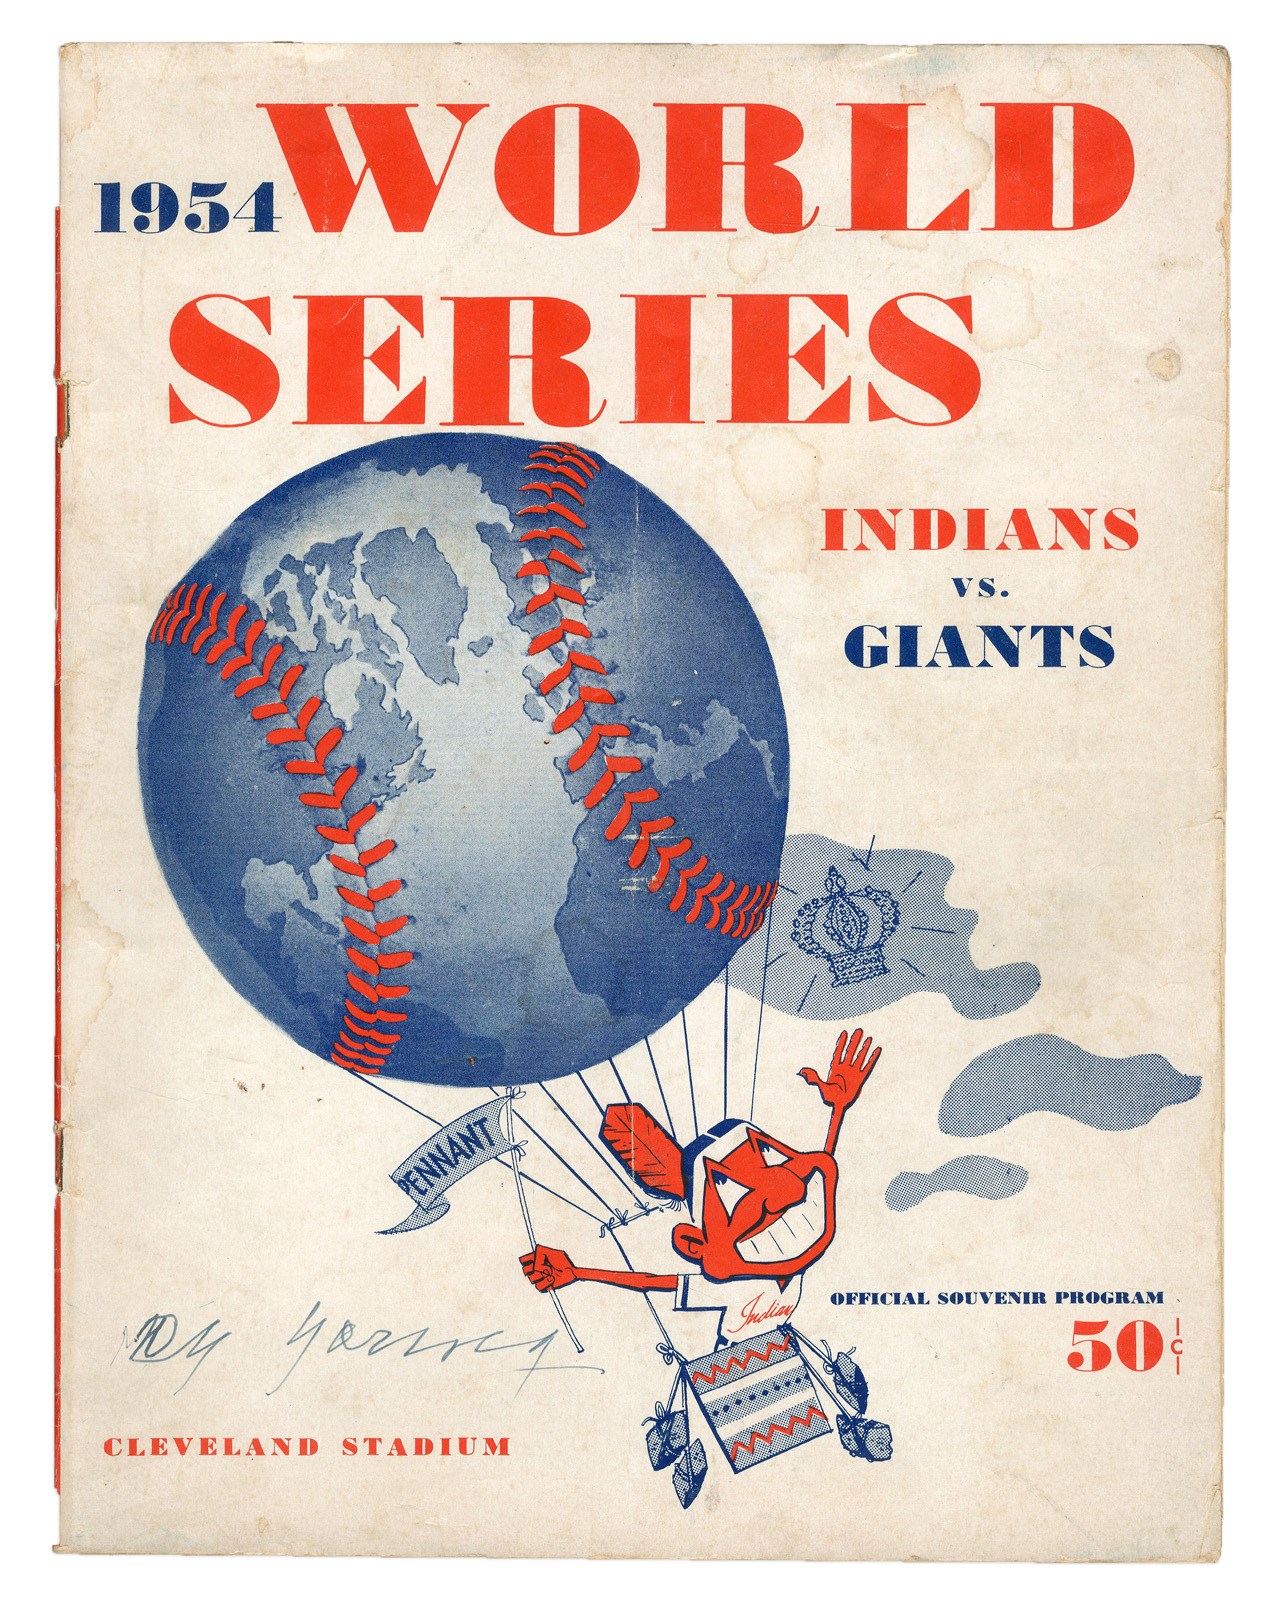 Baseball Autographs - 1954 World Series Program Signed by Cy Young